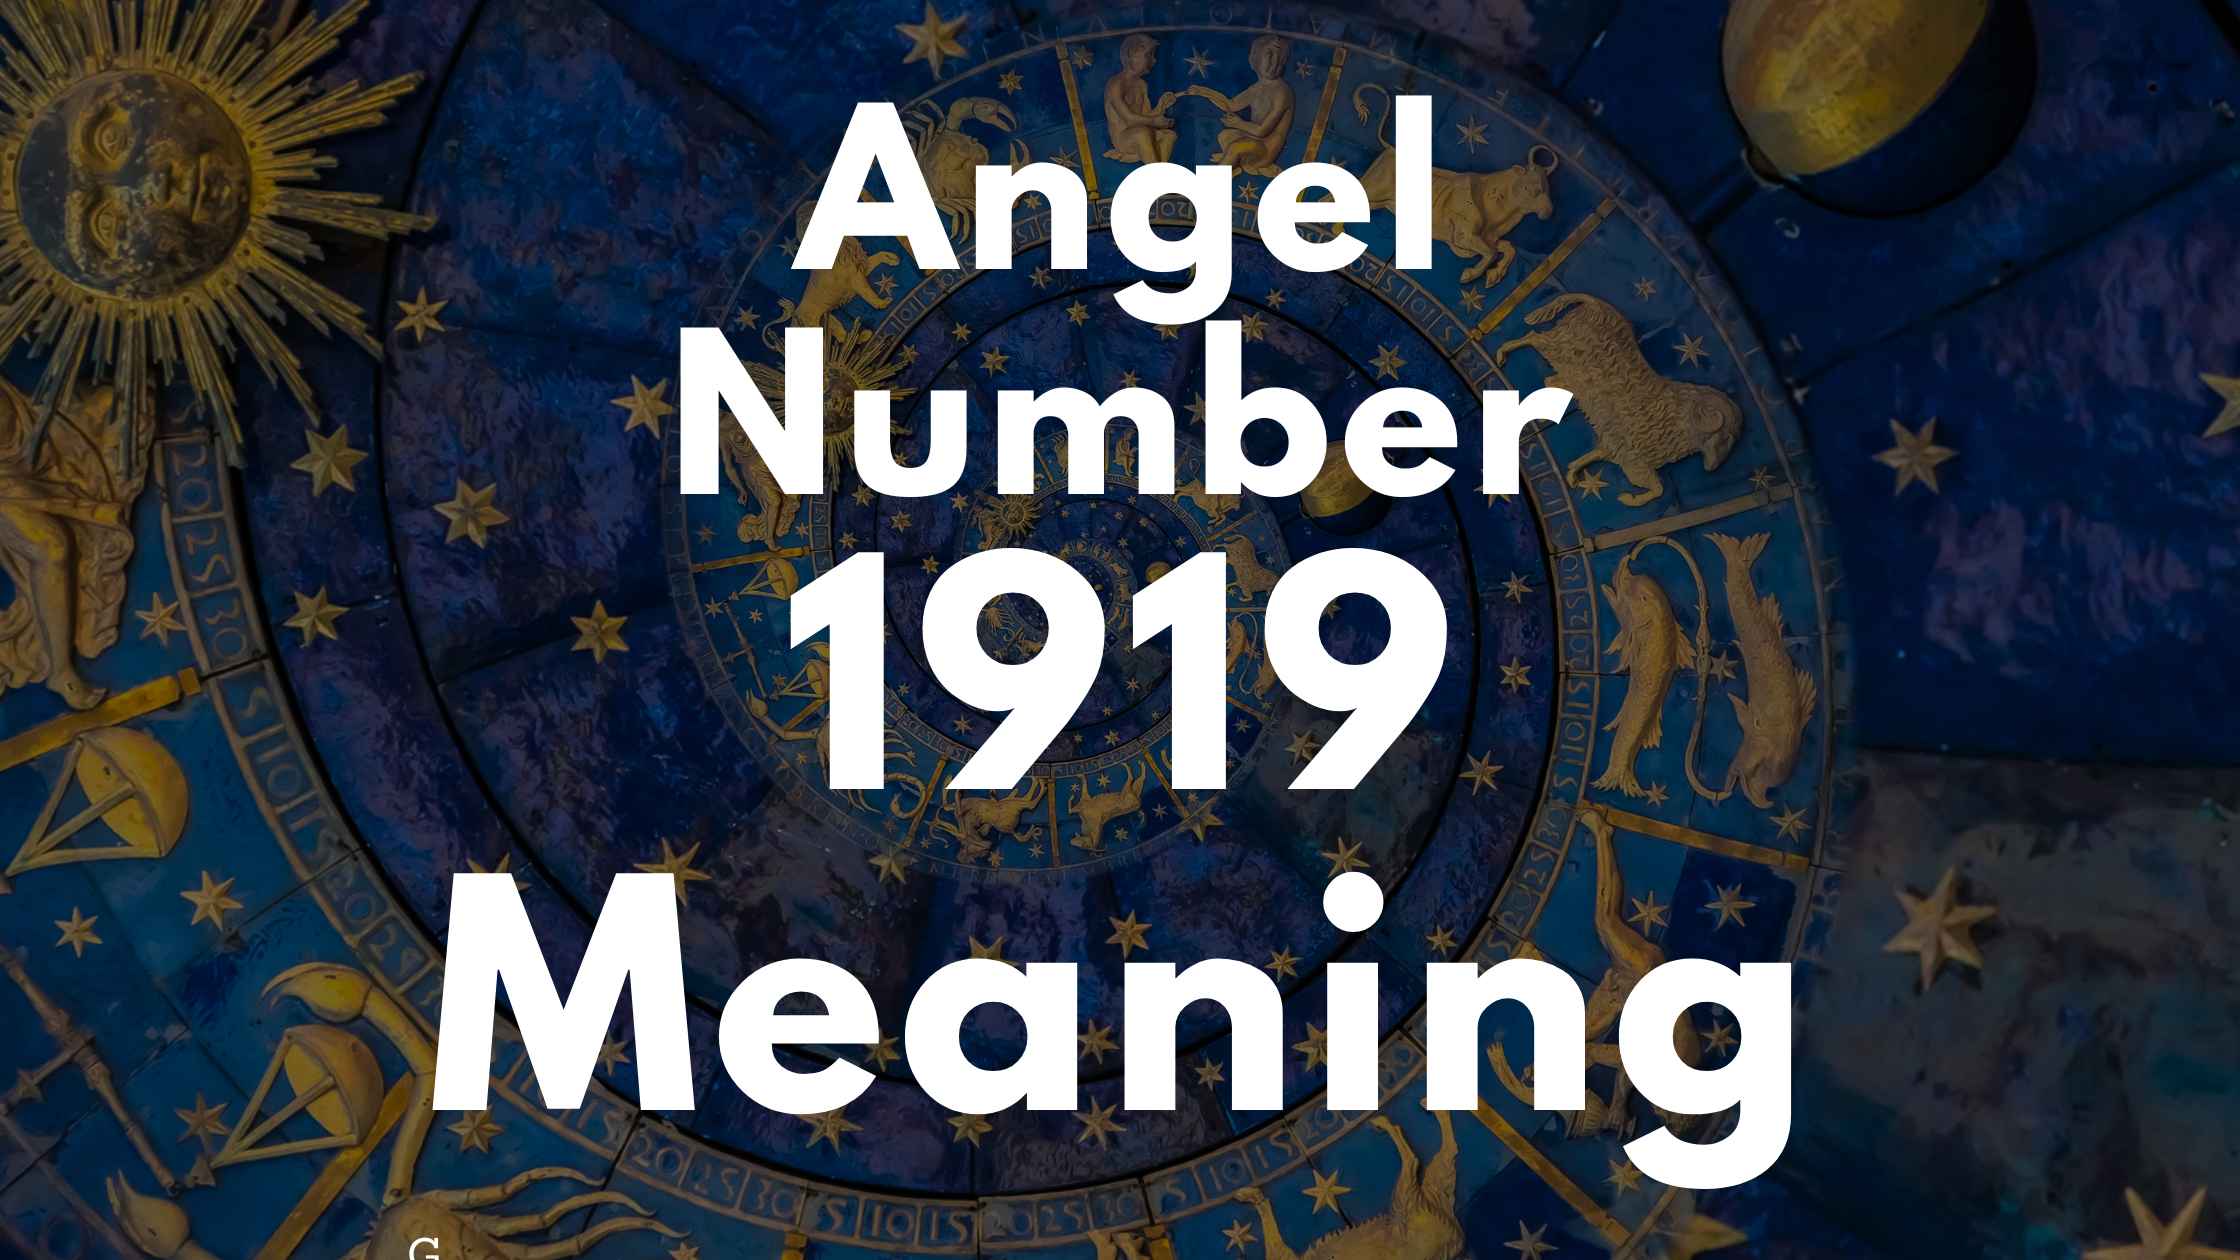 Angel Number 1919 Spiritual Meaning, Symbolism, and Significance